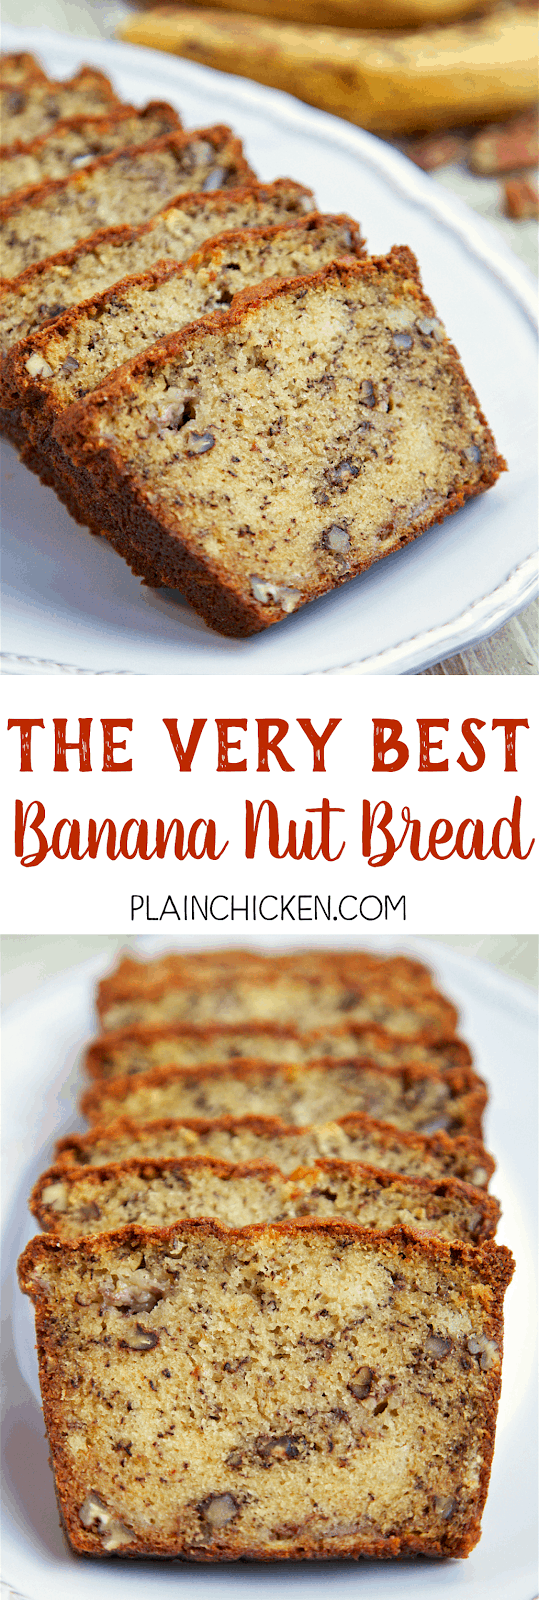 The Very Best Banana Nut Bread - CRAZY good! butter, sugar, eggs, flour, baking soda, buttermilk, ripe bananas and pecans - SO easy to make. Tastes amazing. Great for breakfast or an afternoon snack.